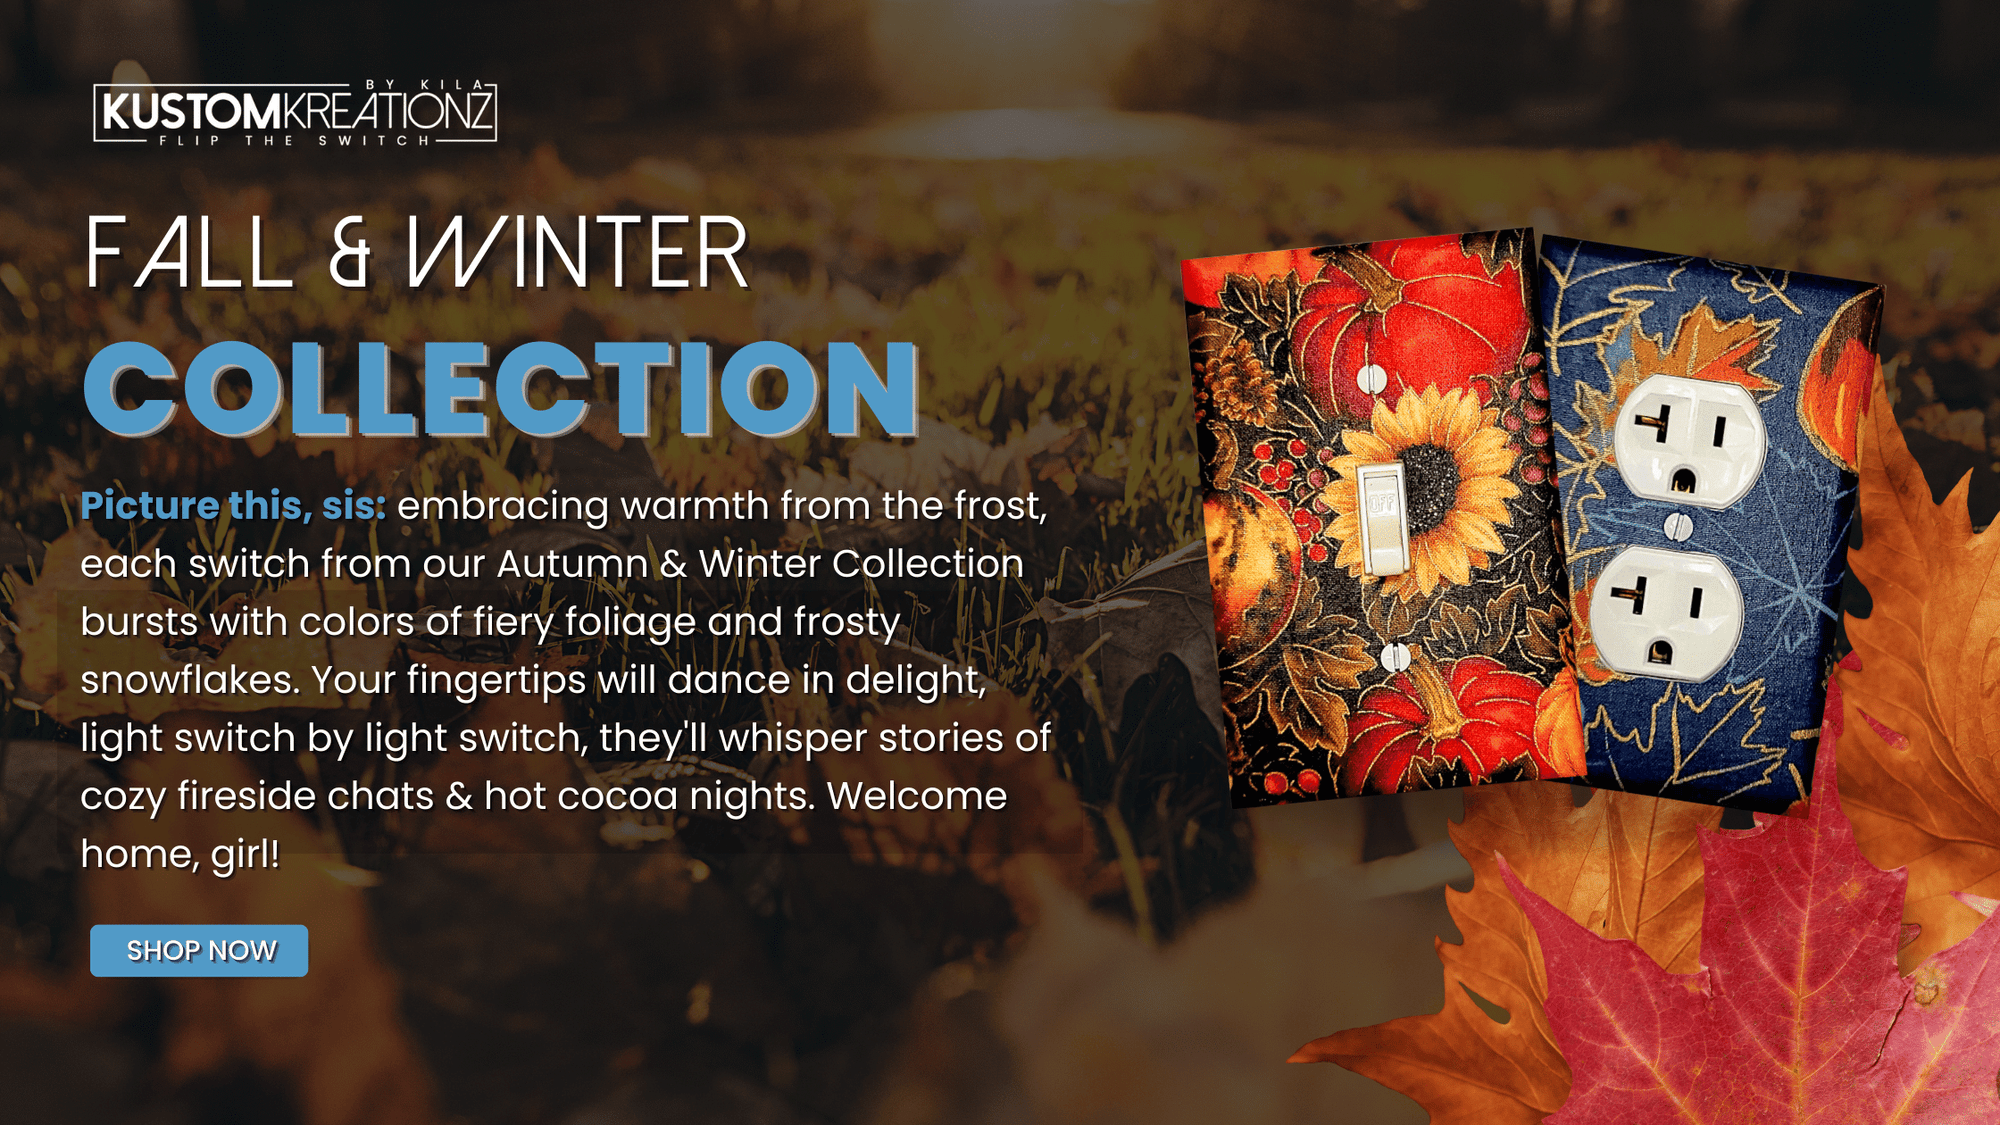 Sis, feel the frost's warmth with our Autumn & Winter Collection. Fiery foliage meets frosty flakes at your fingertips. Fun switch stories of cozy chats and cocoa nights. Welcome home, girl! 